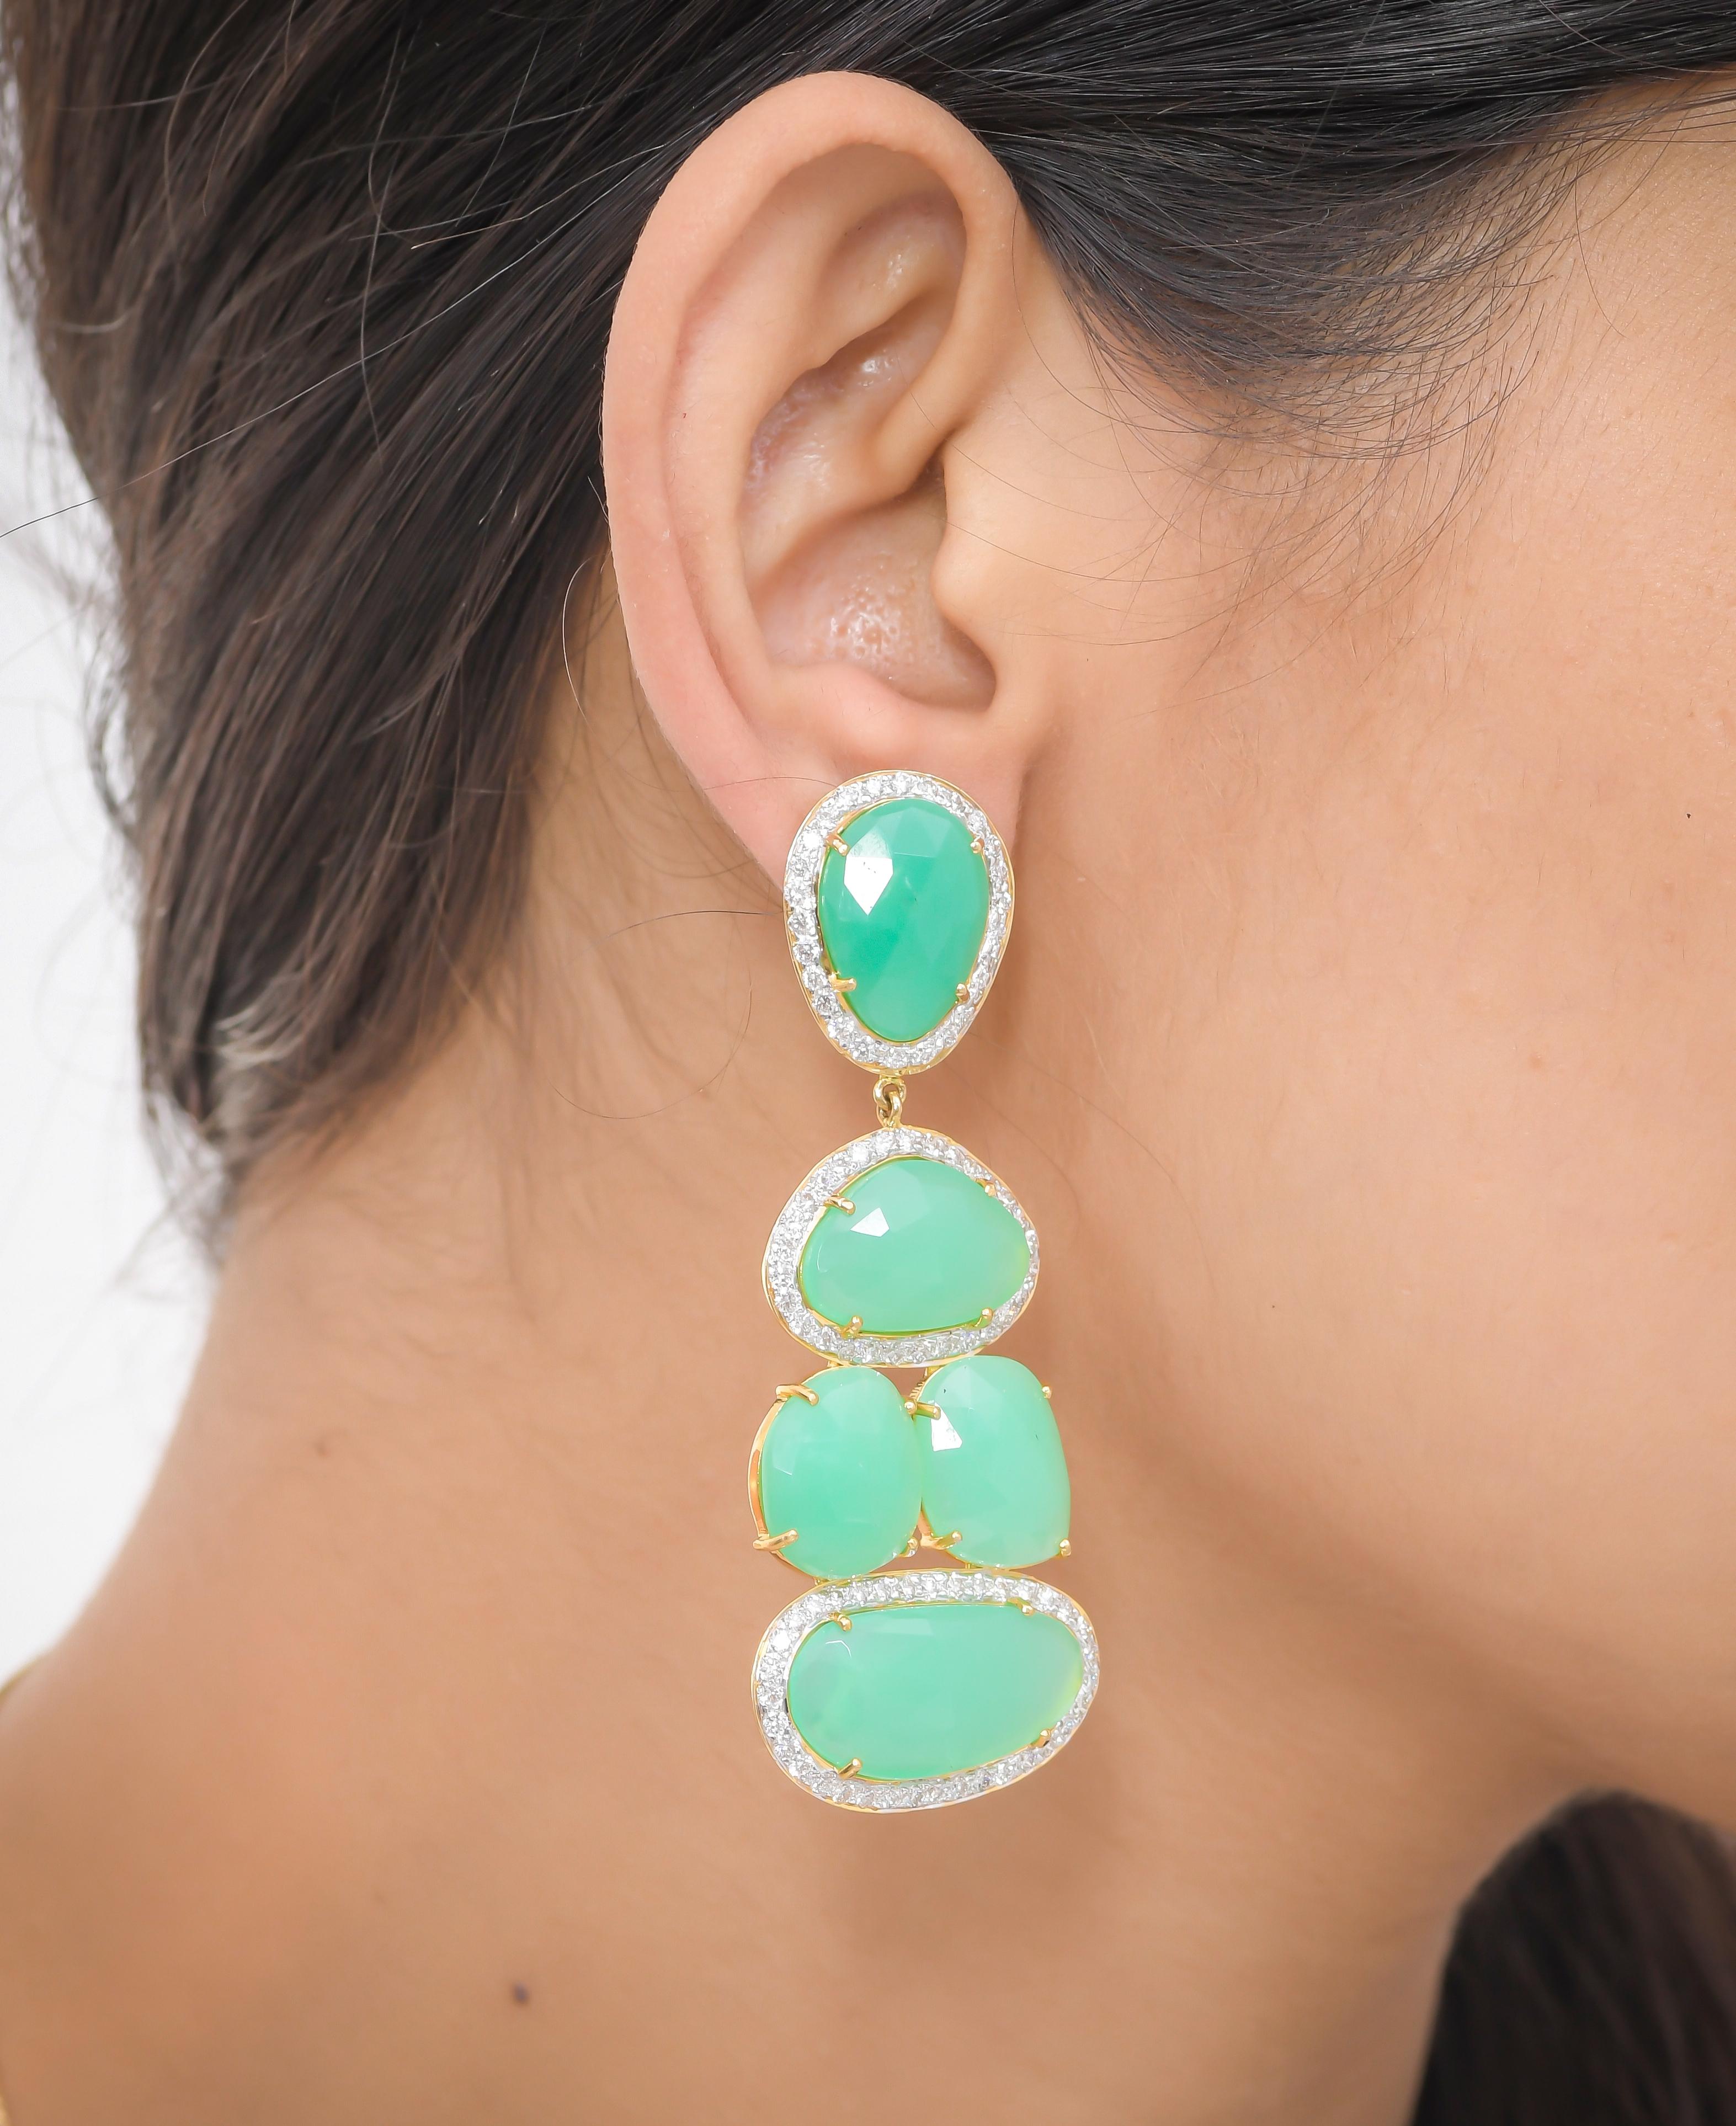 Cabochon 52.36 Carat Chrysoprase And Diamond 18 Karat Yellow Gold Earrings For Sale